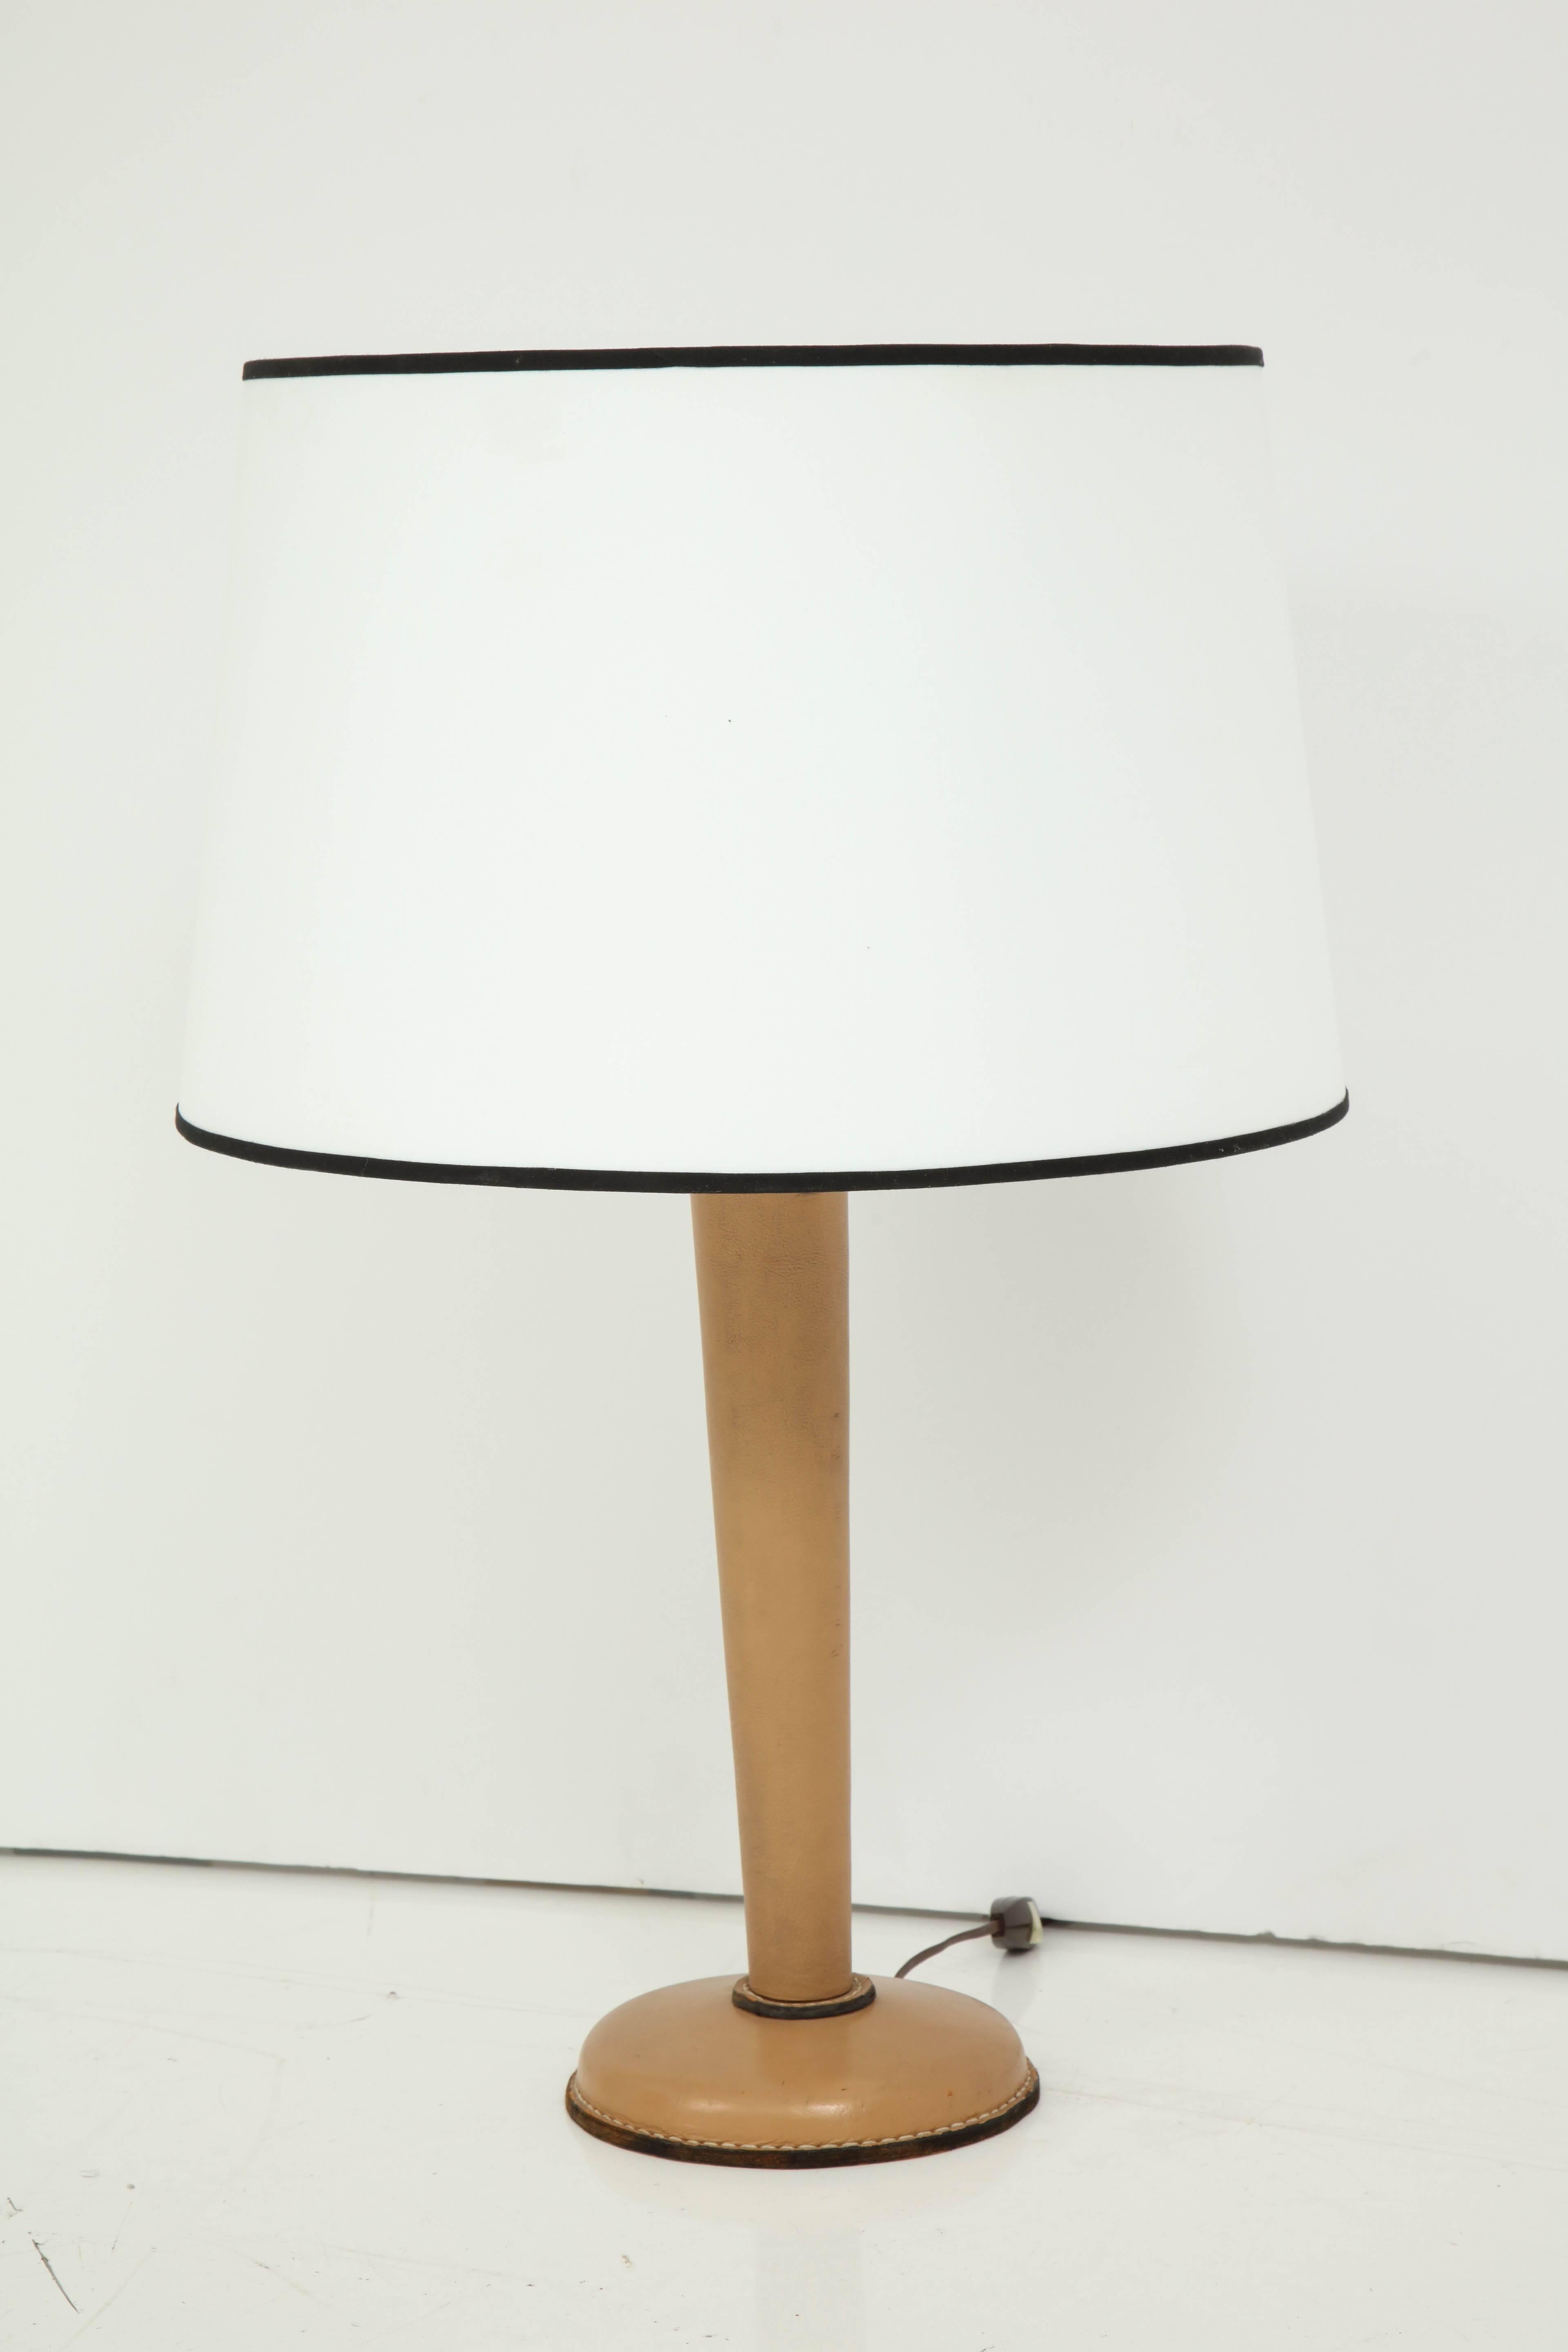 Tan stitched leather lamp by Jacques Adnet. Shade is for pictures and a custom one can be made on request. Base alone 7